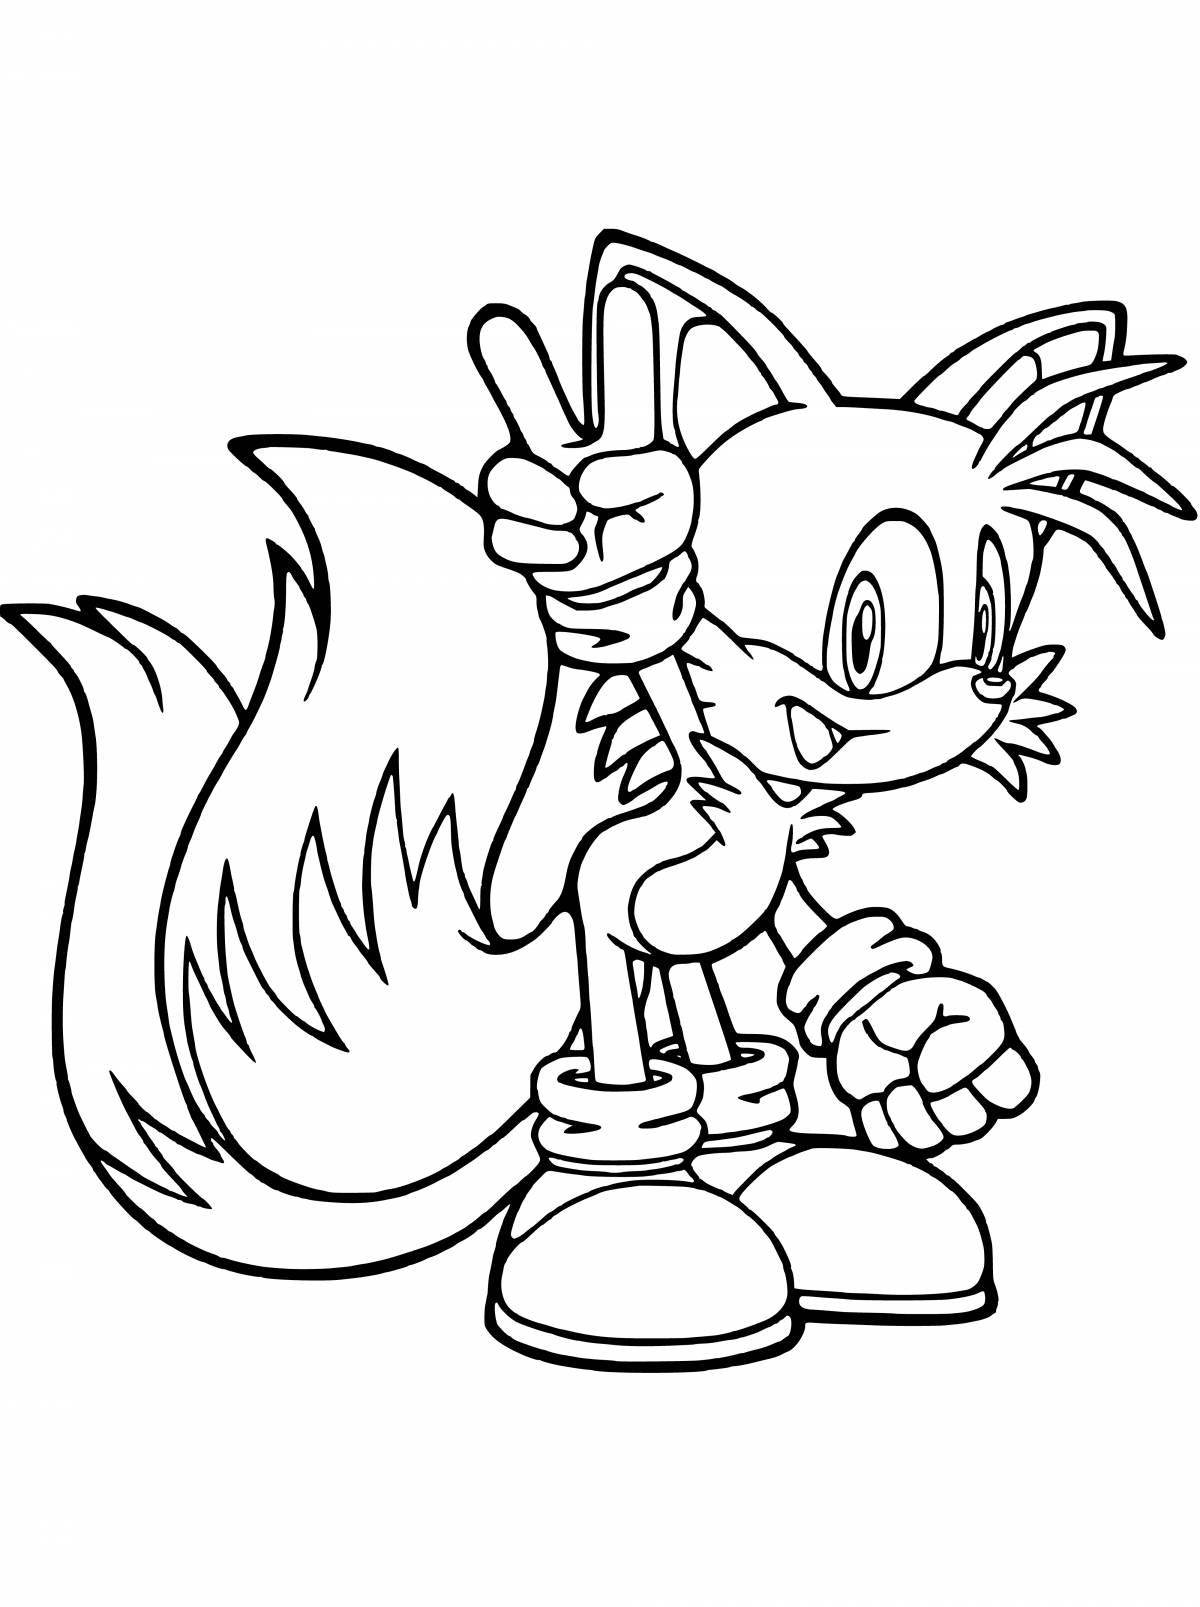 Outstanding sonic and tails coloring page